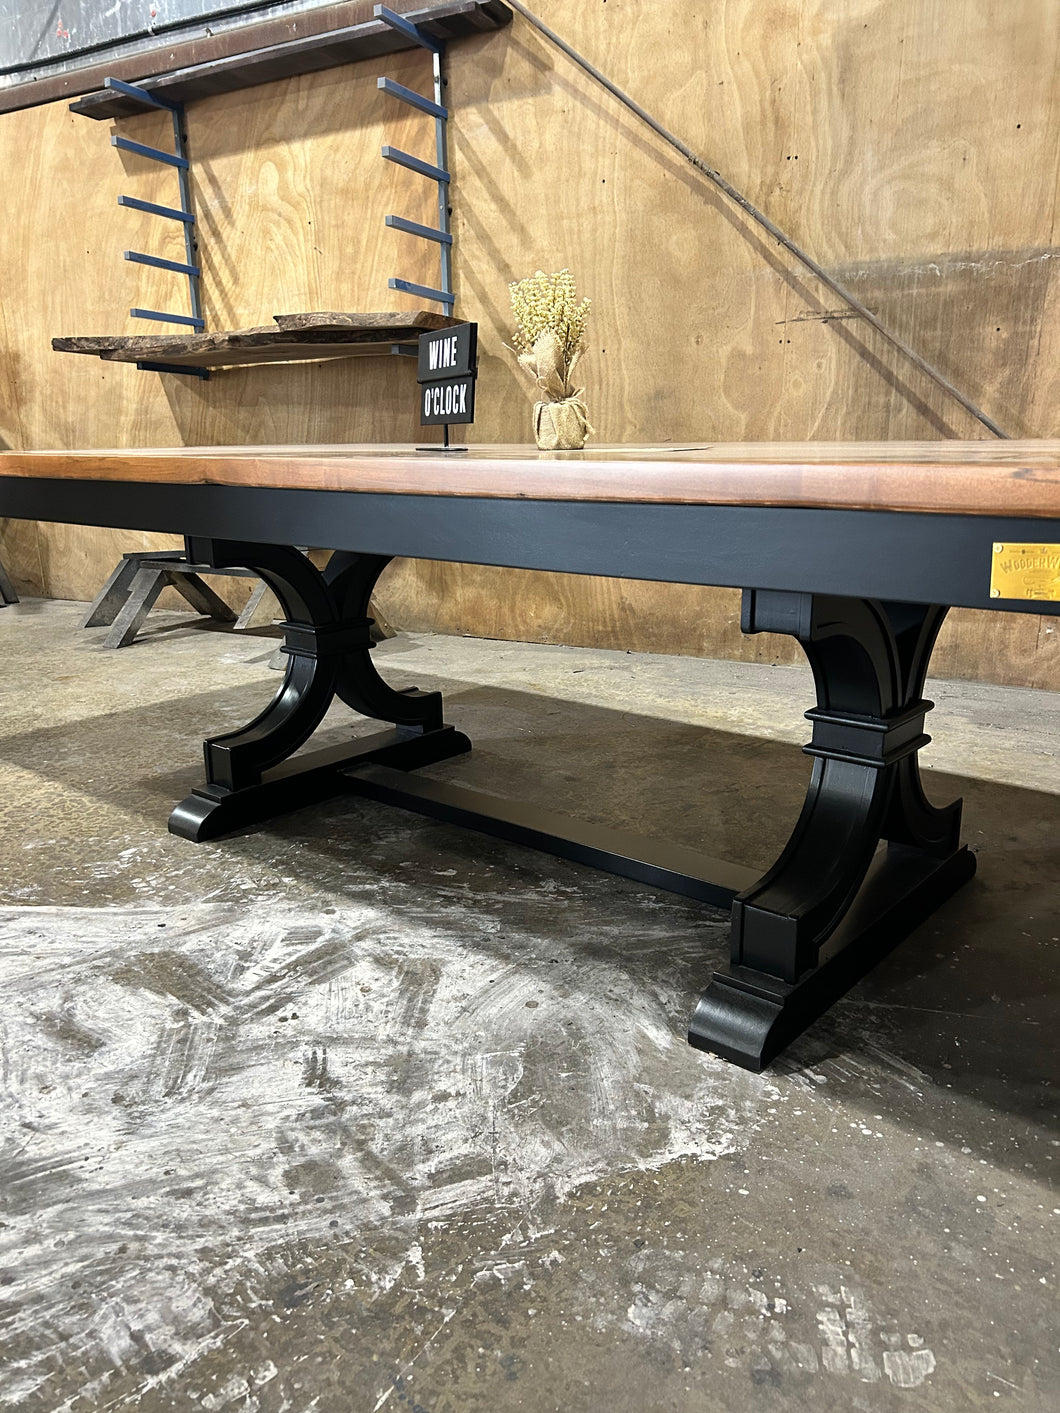 7 foot dining table with 2 12” extensions